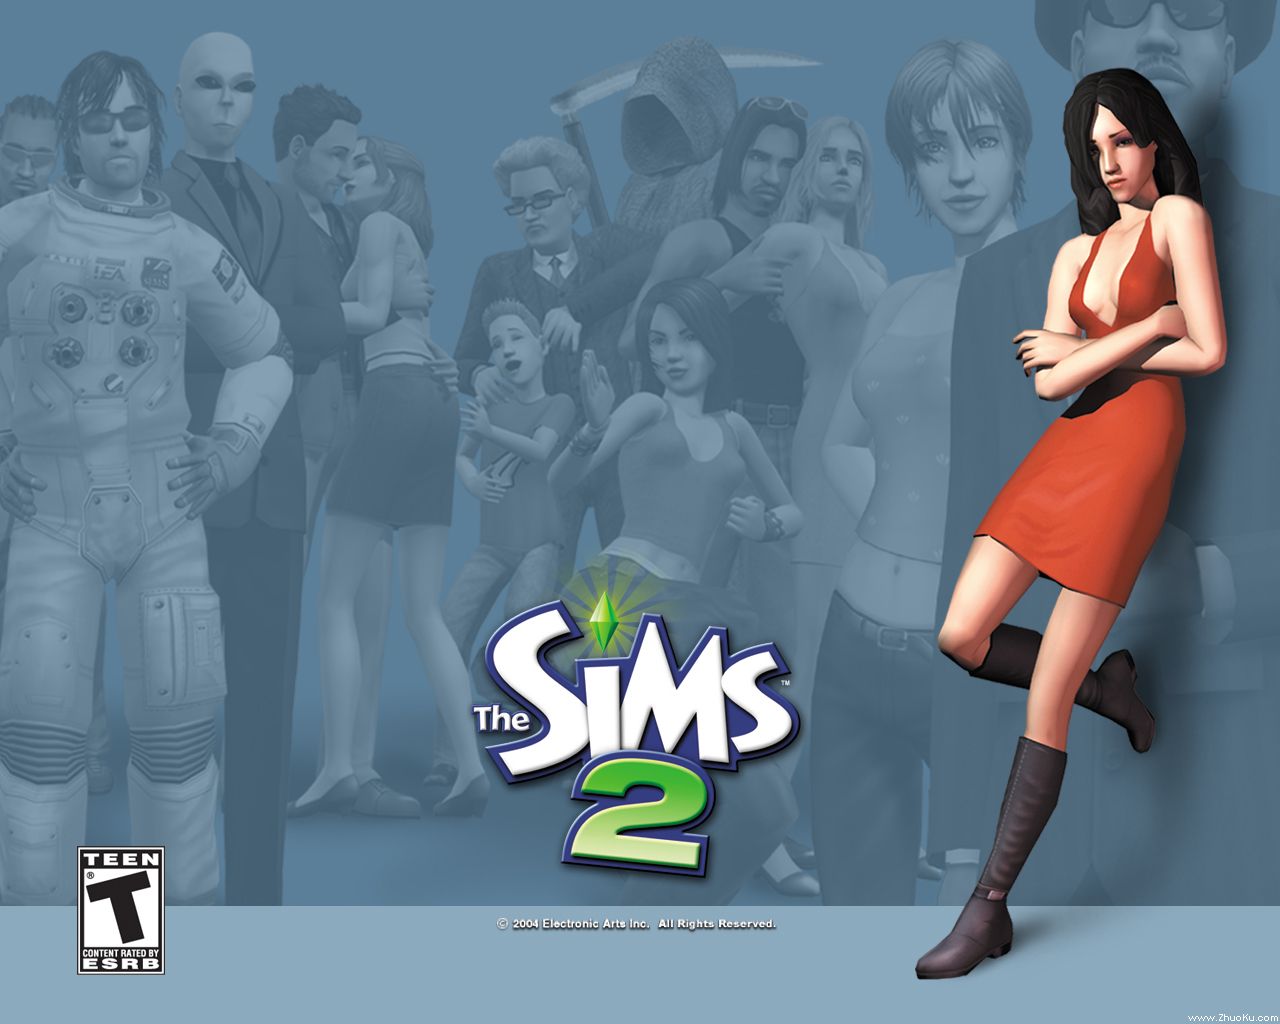 ģ2(The Sims 2)ֽ(ֽ16)